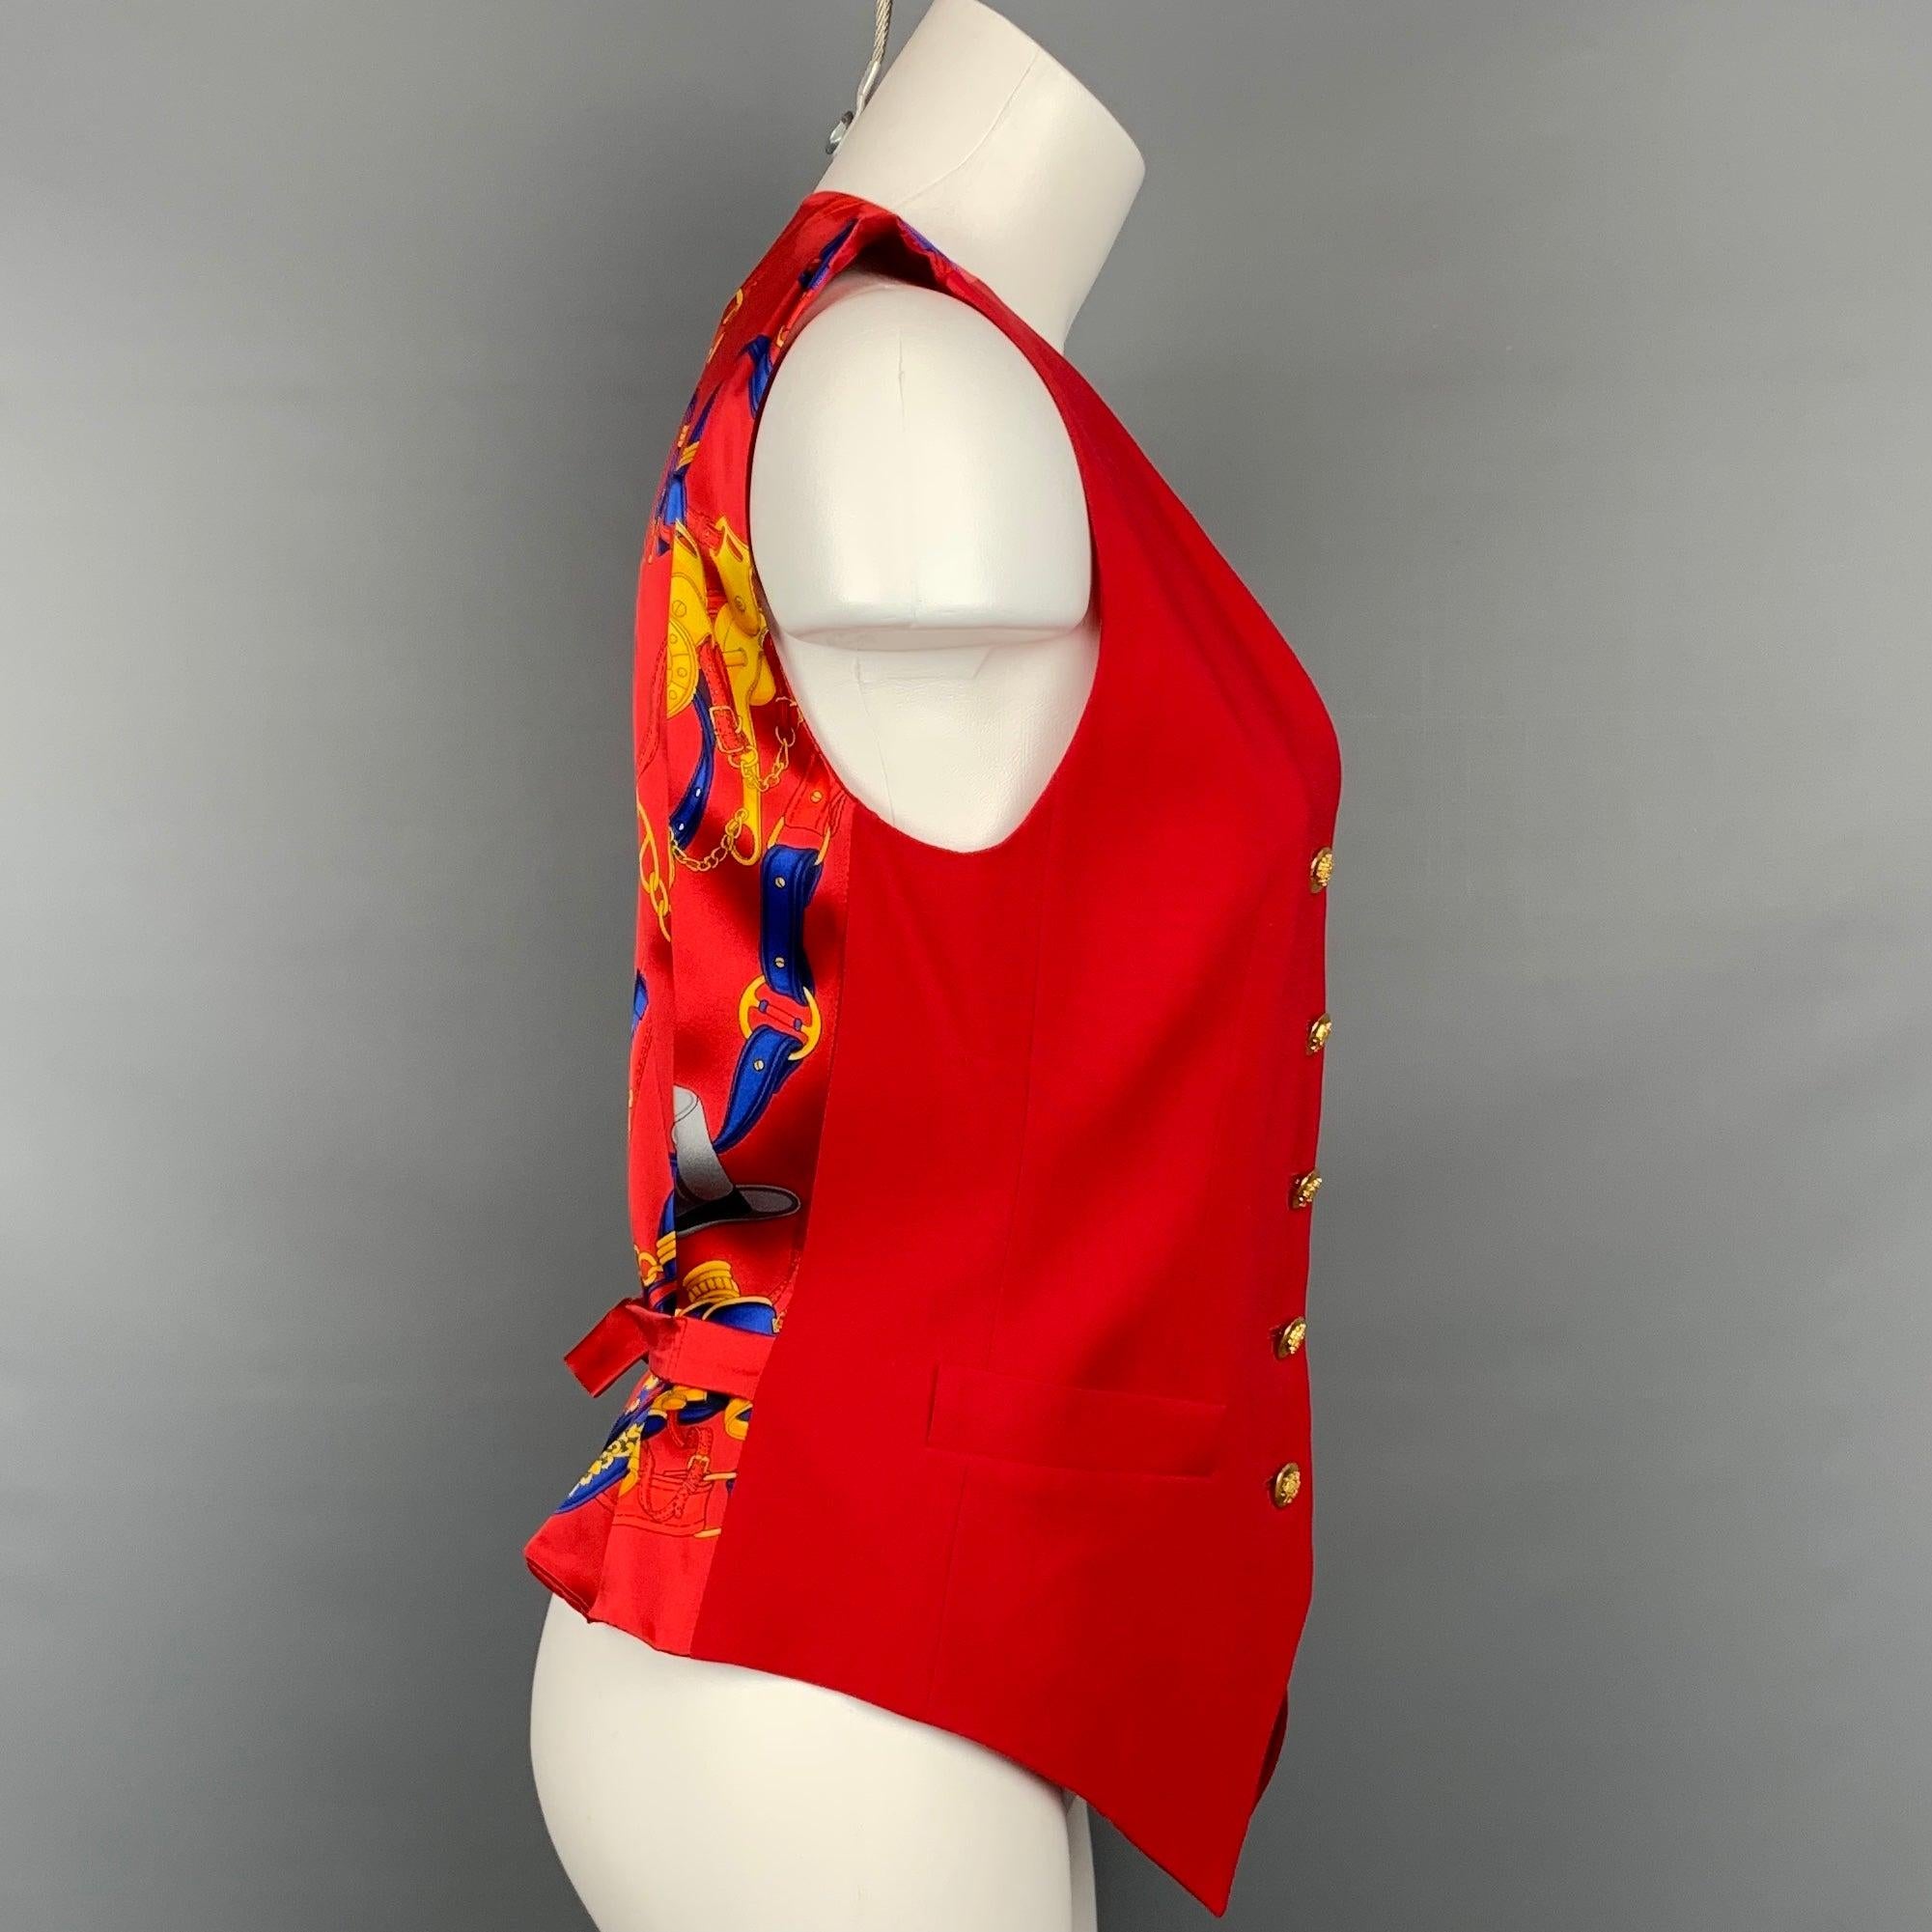 Vintage ESCADA vest comes in a red & blue equestrian print silk featuring 
back belt, front pockets, and gold tone button closure.
Very Good
Pre-Owned Condition. 

Marked:   34 

Measurements: 
 
Shoulder: 13.5 inches  Bust: 32 inches  Length: 20